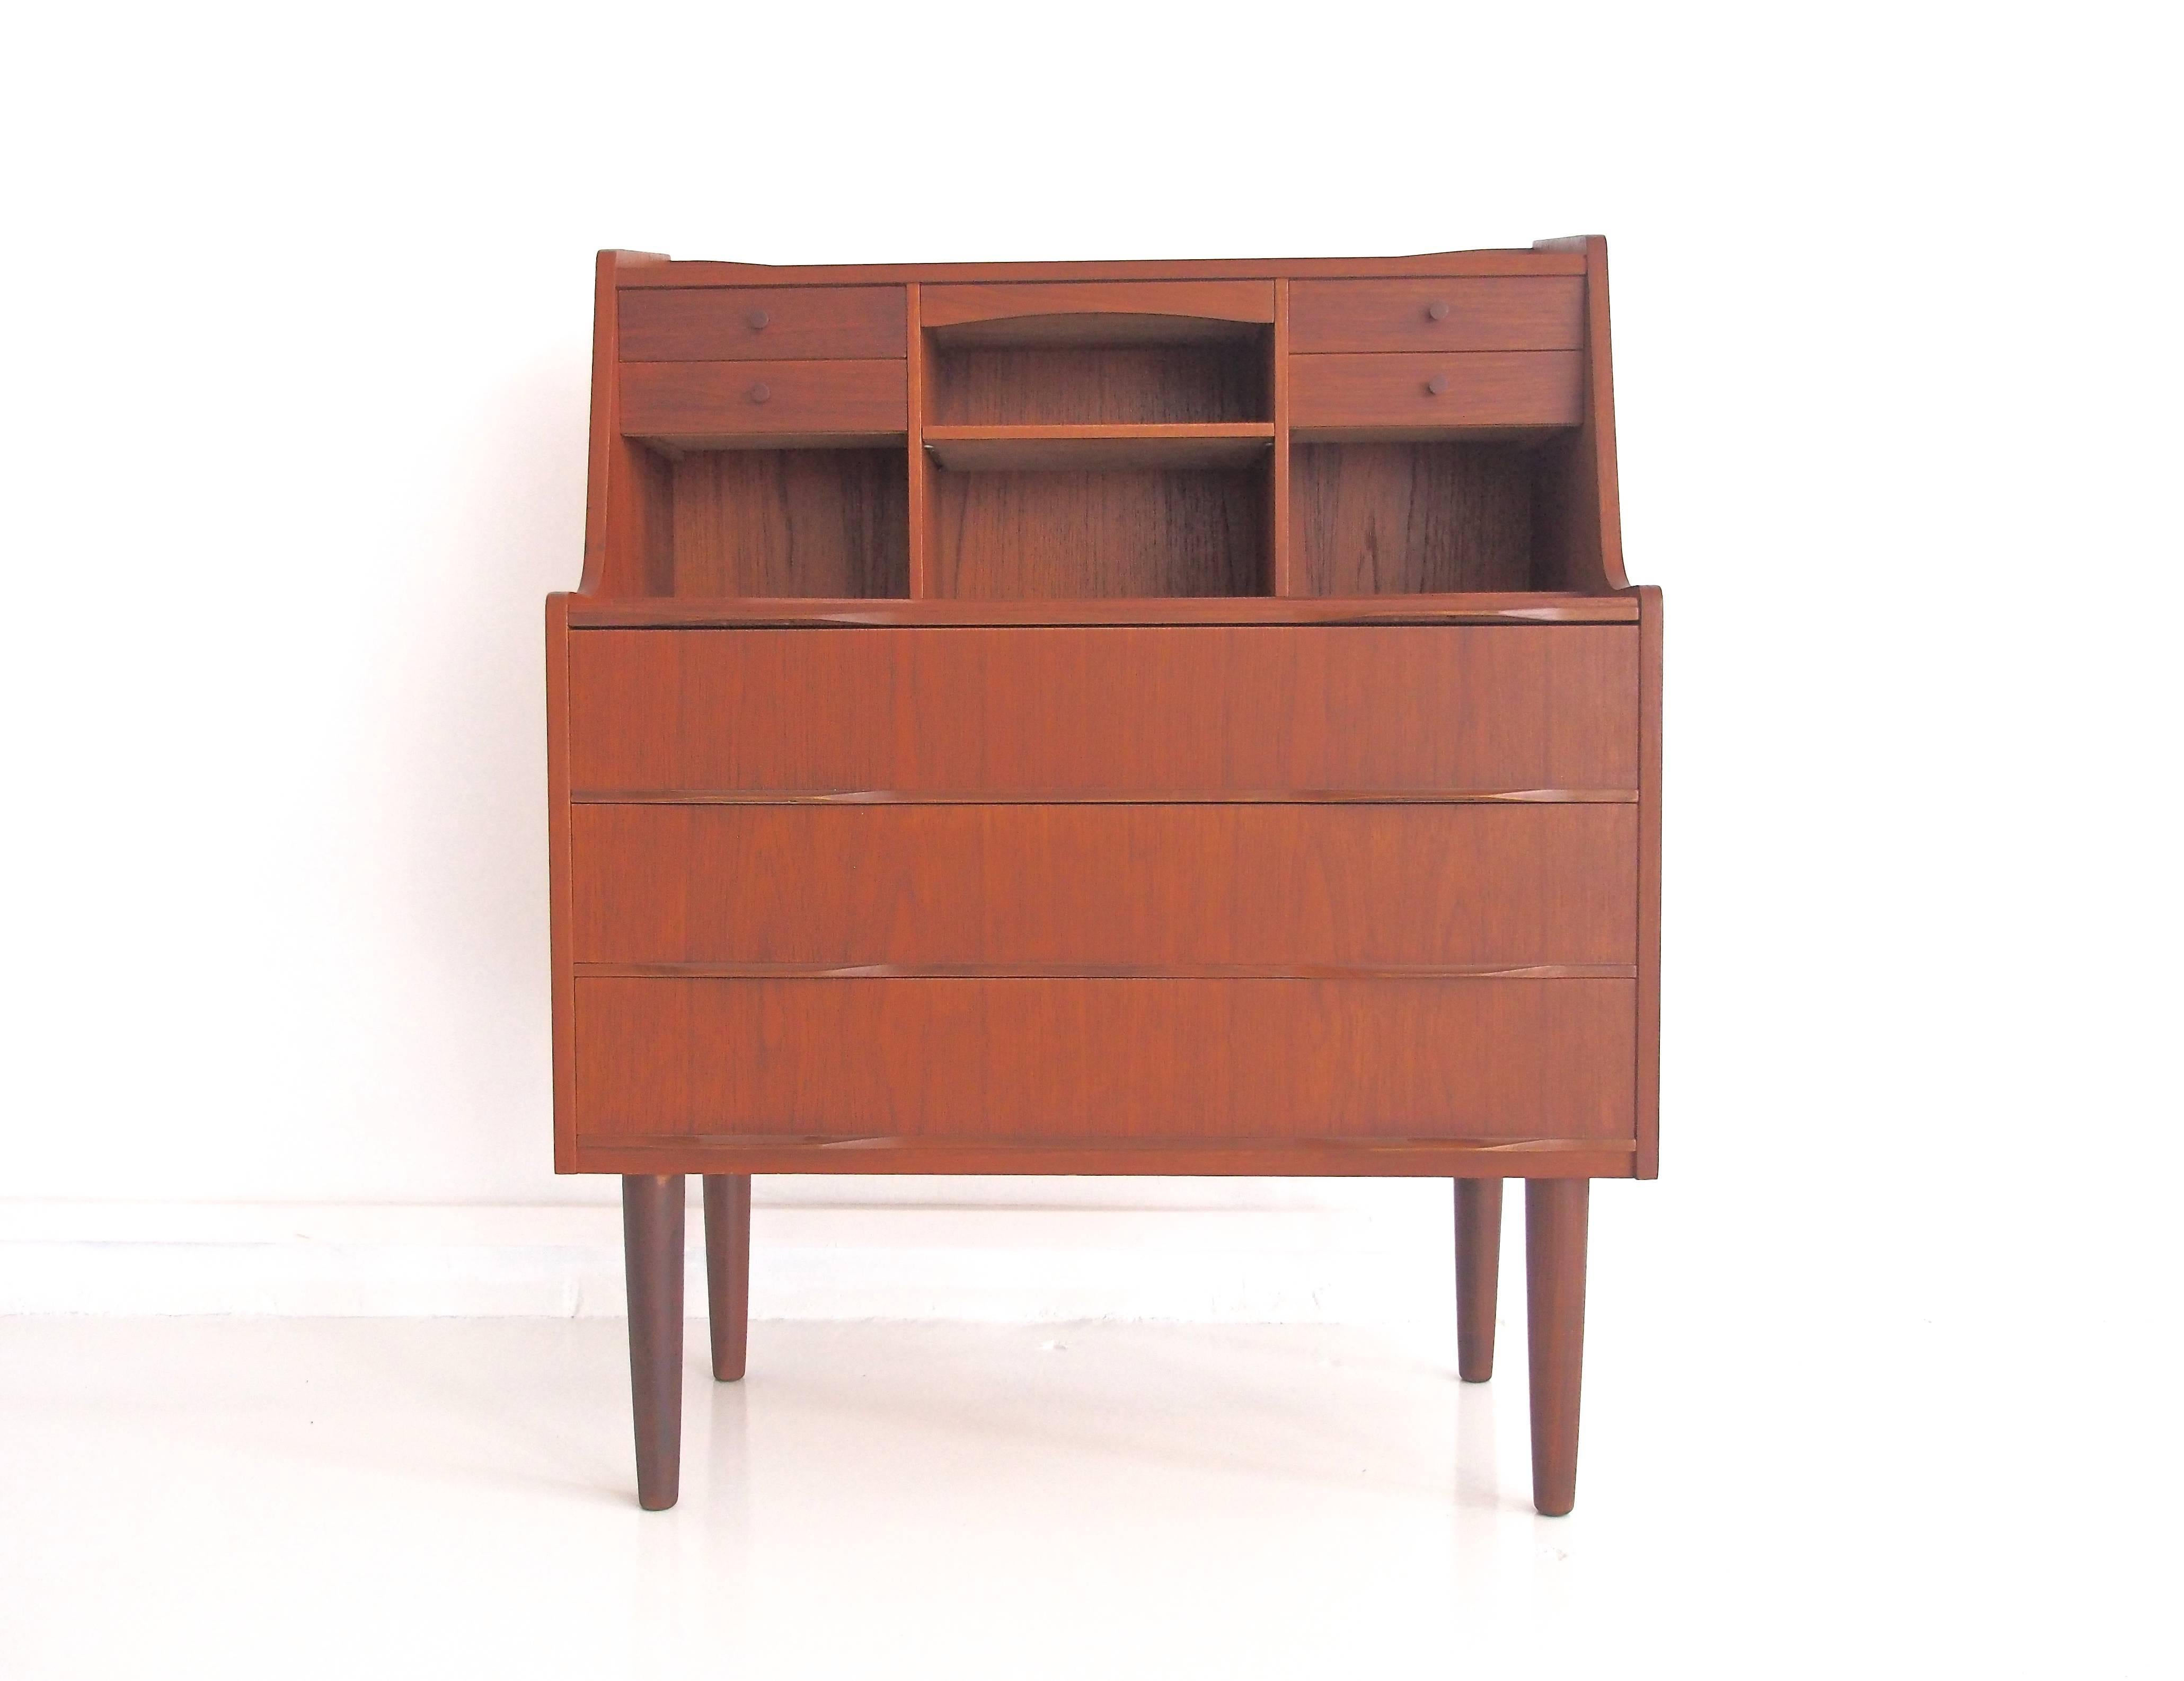 Bureau or dressing table made of veneered teak on round tapered legs. Front with three large drawers. On the top, four small drawers and compartments, as well as a pull-up mirror and a pull-out writing board. Recently restored.